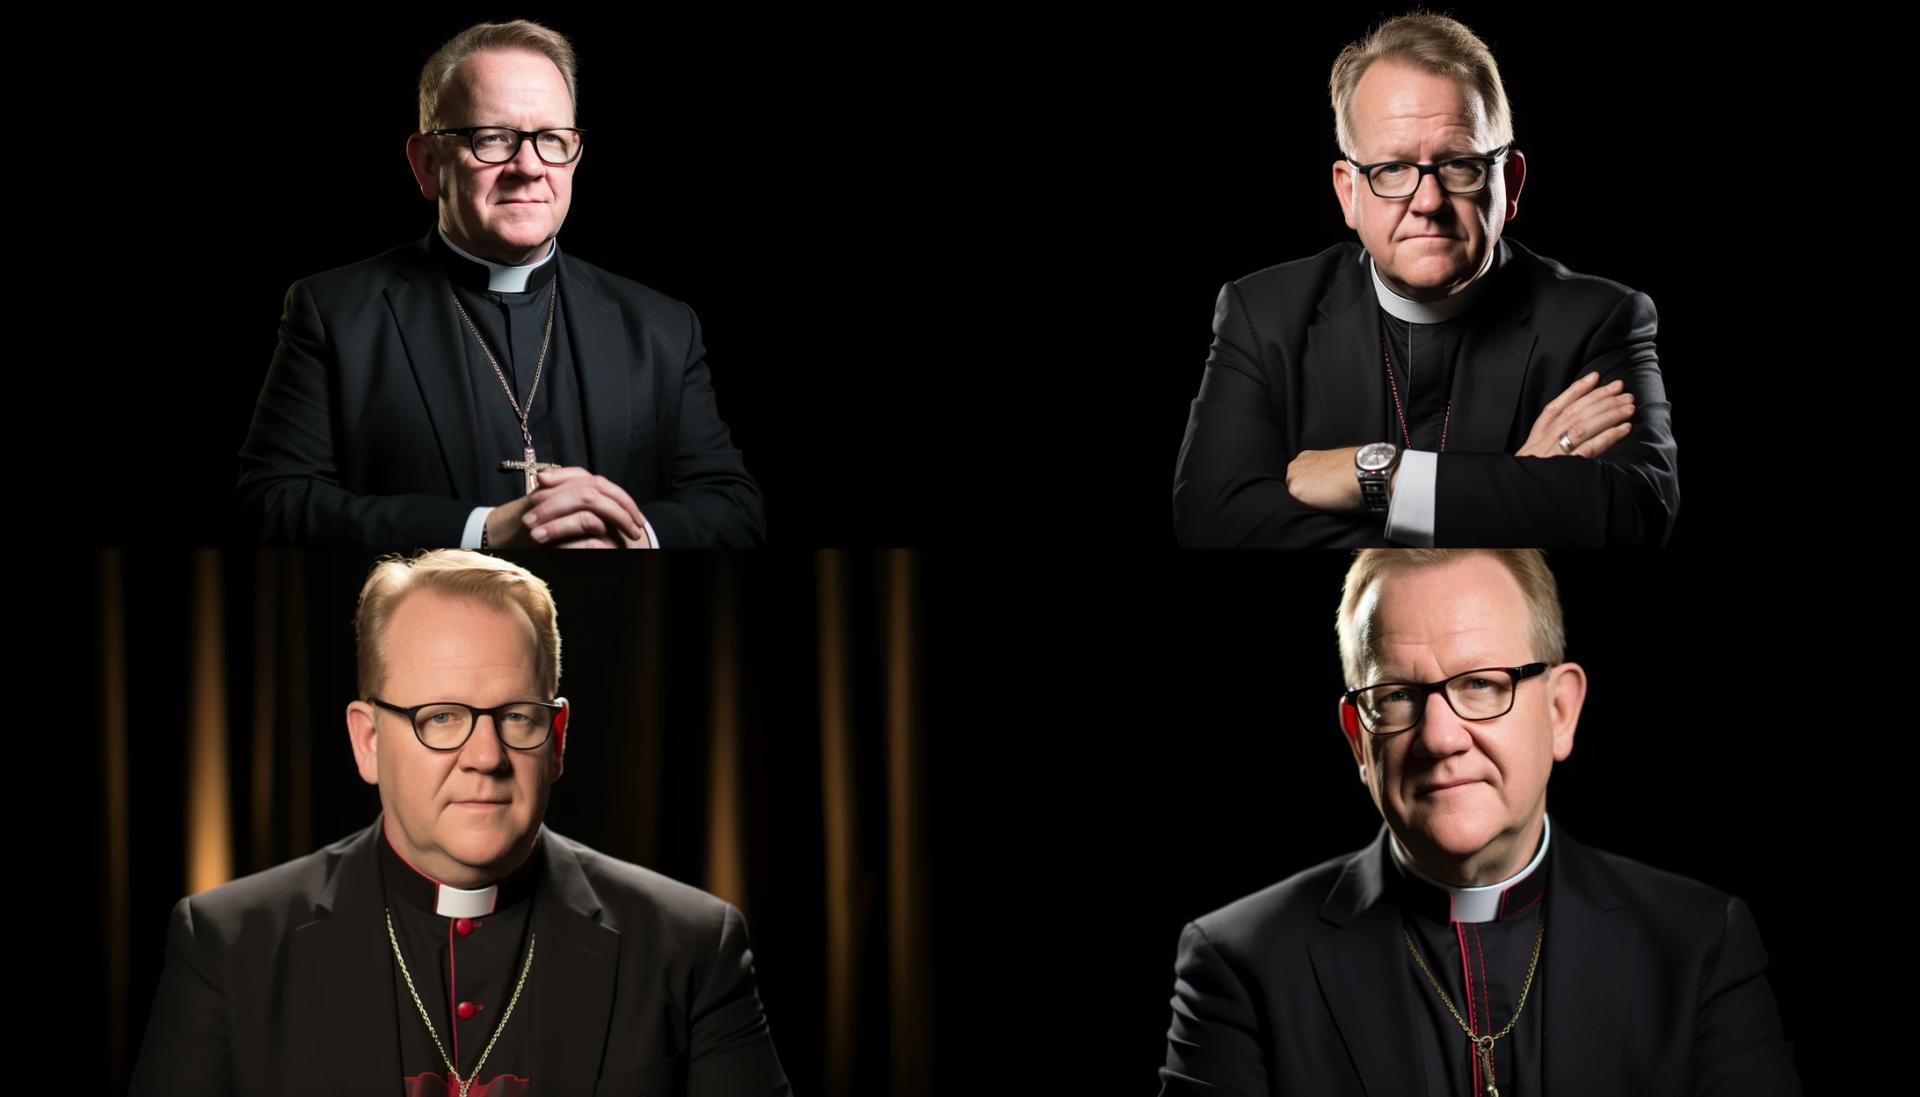 Bishop Robert Barron in his clerical attire, representing the thoughtful faith model mentioned in the article (taken with Canon EOS 5D Mark IV).